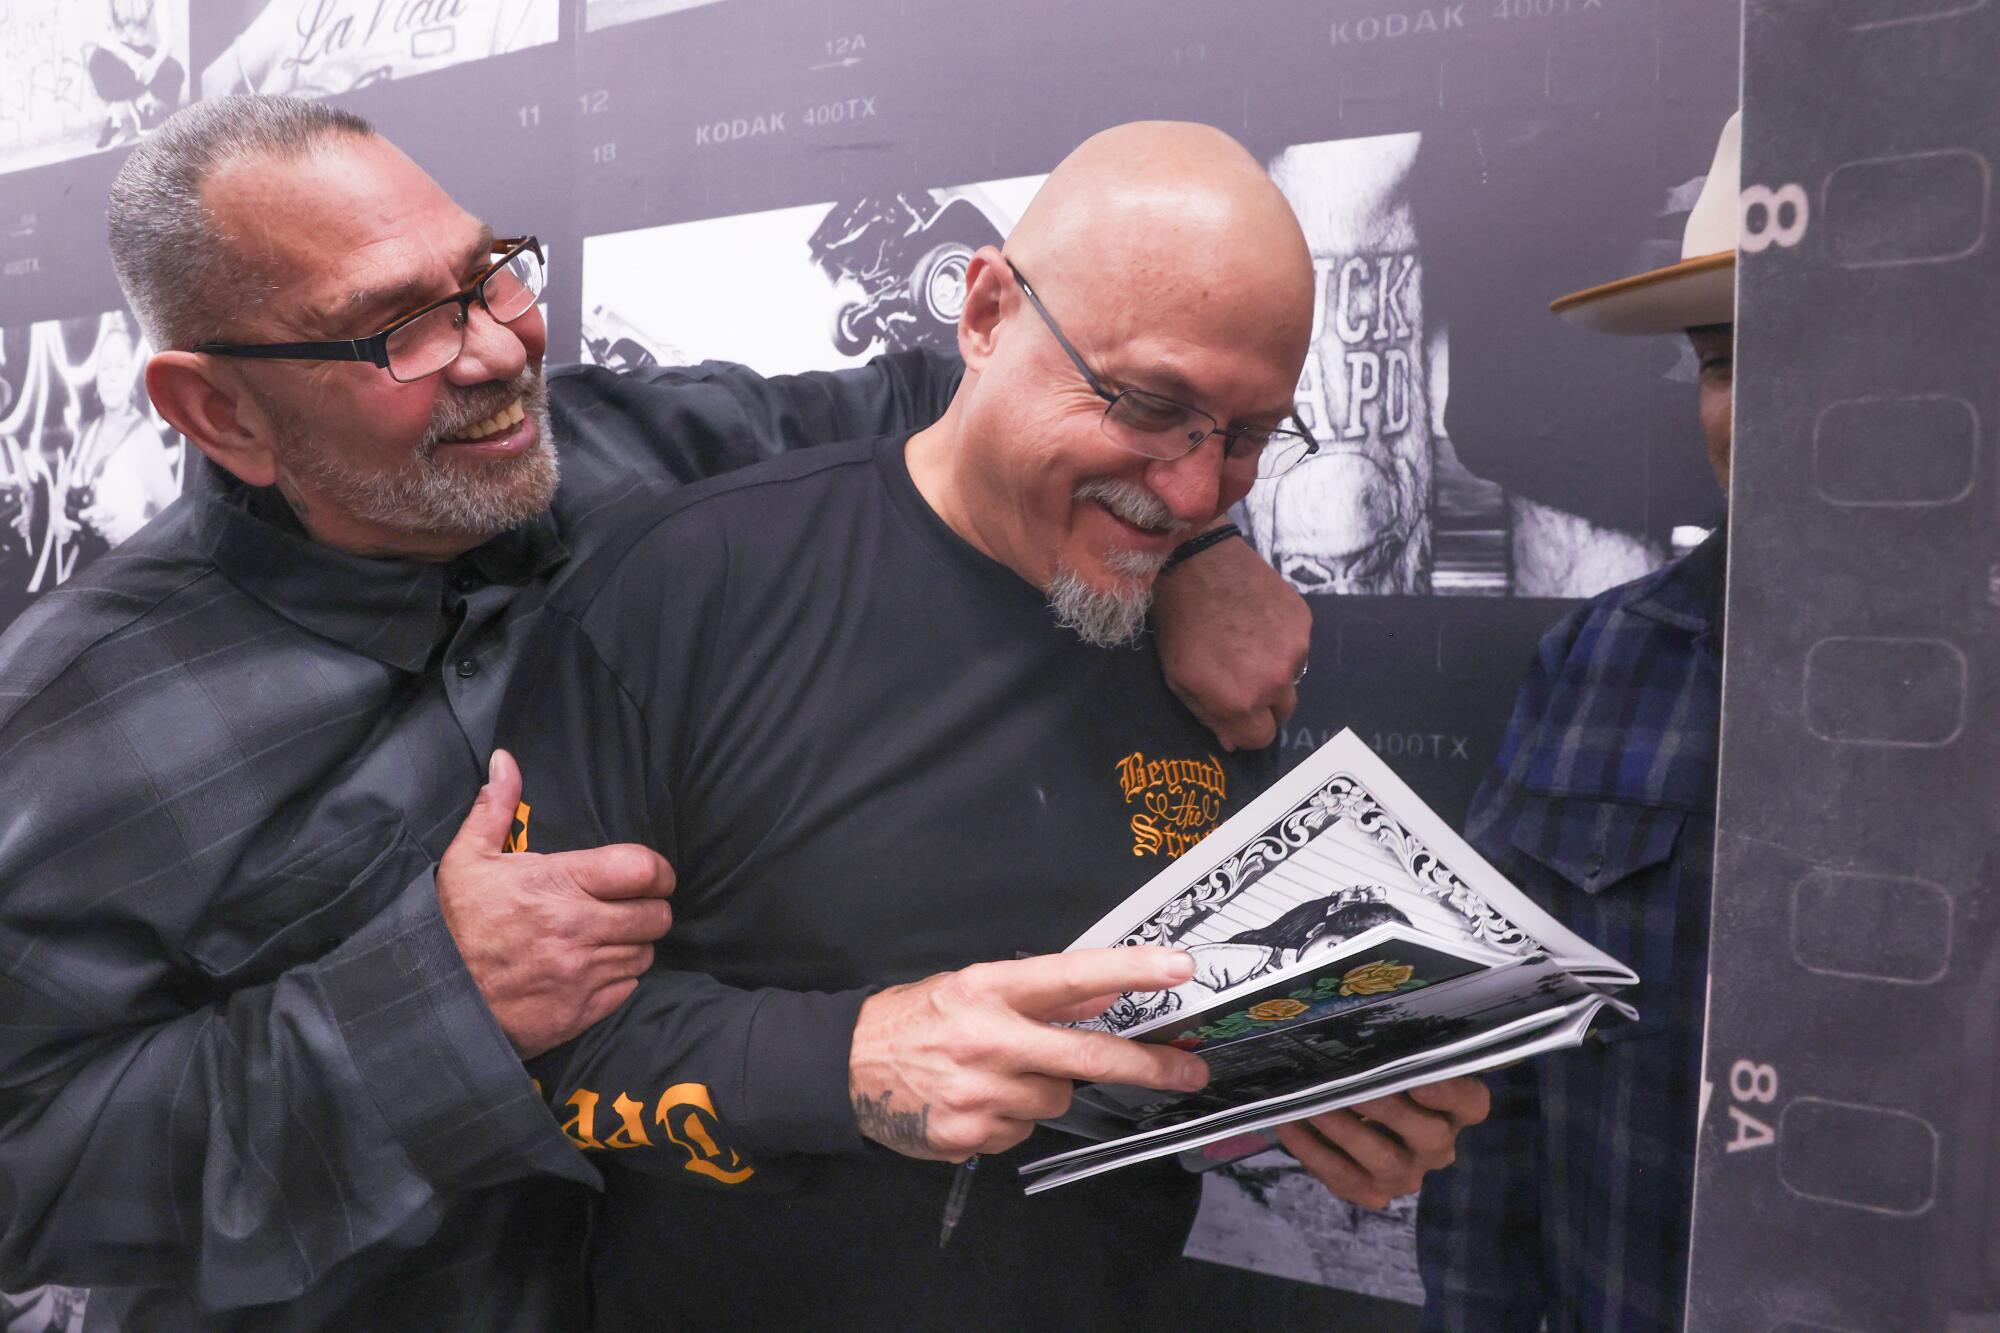 Estevan Oriol is embraced by OG Lepke, who he took many photos of, during the opening at Beyond The Streets Gallery.